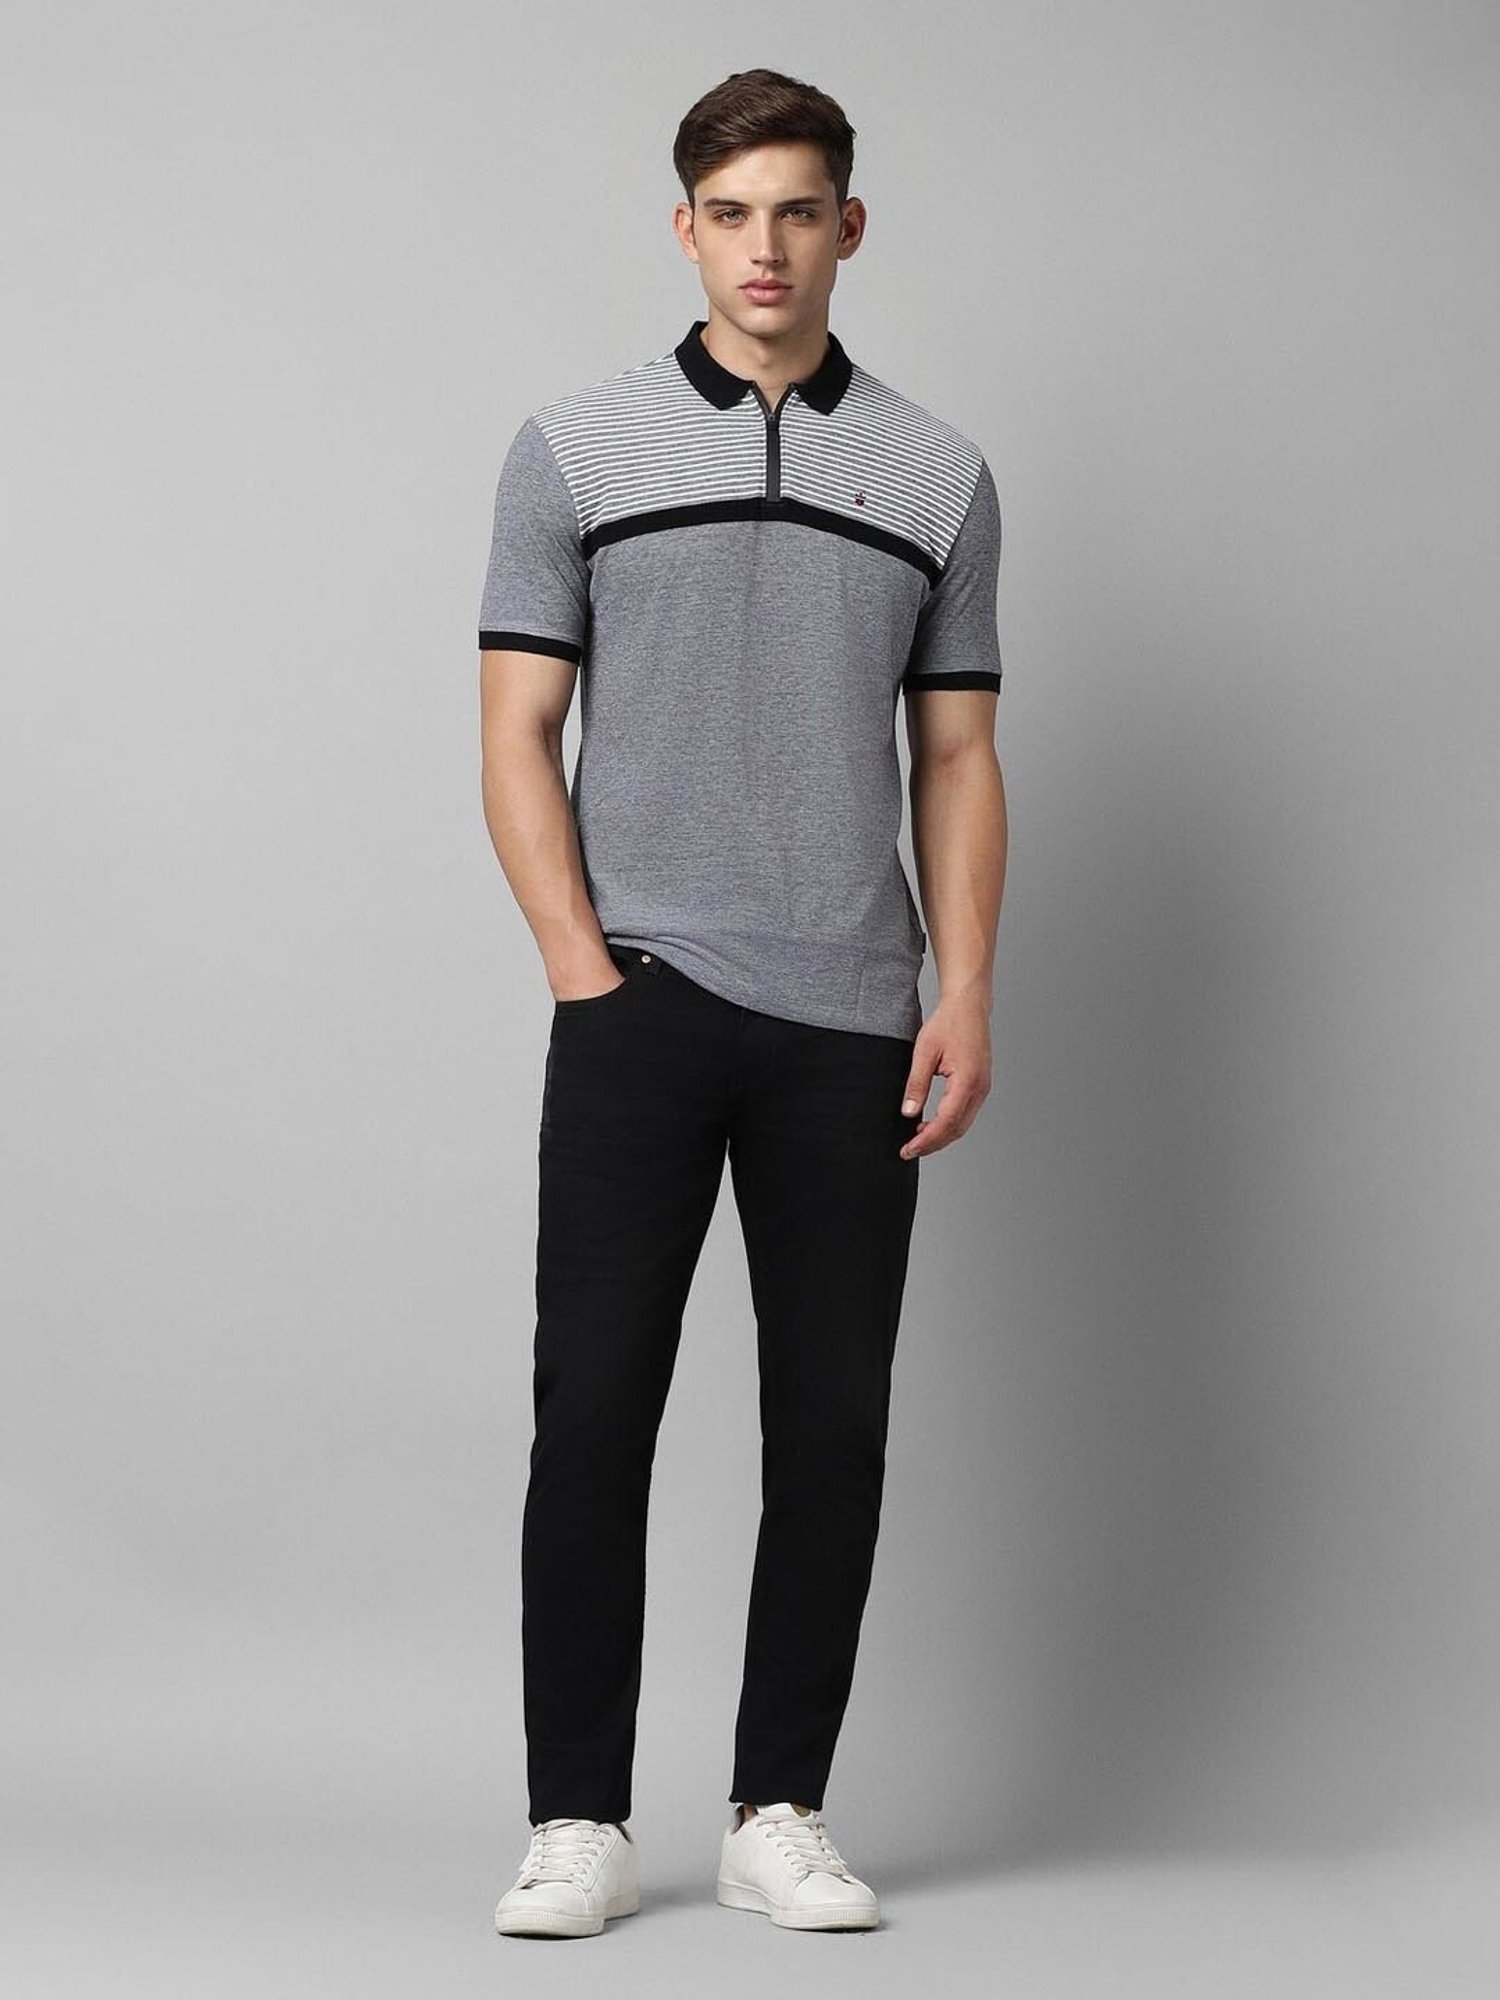 Men's Black Polo, Light Blue Dress Pants, White Leather Low Top Sneakers |  Lookastic